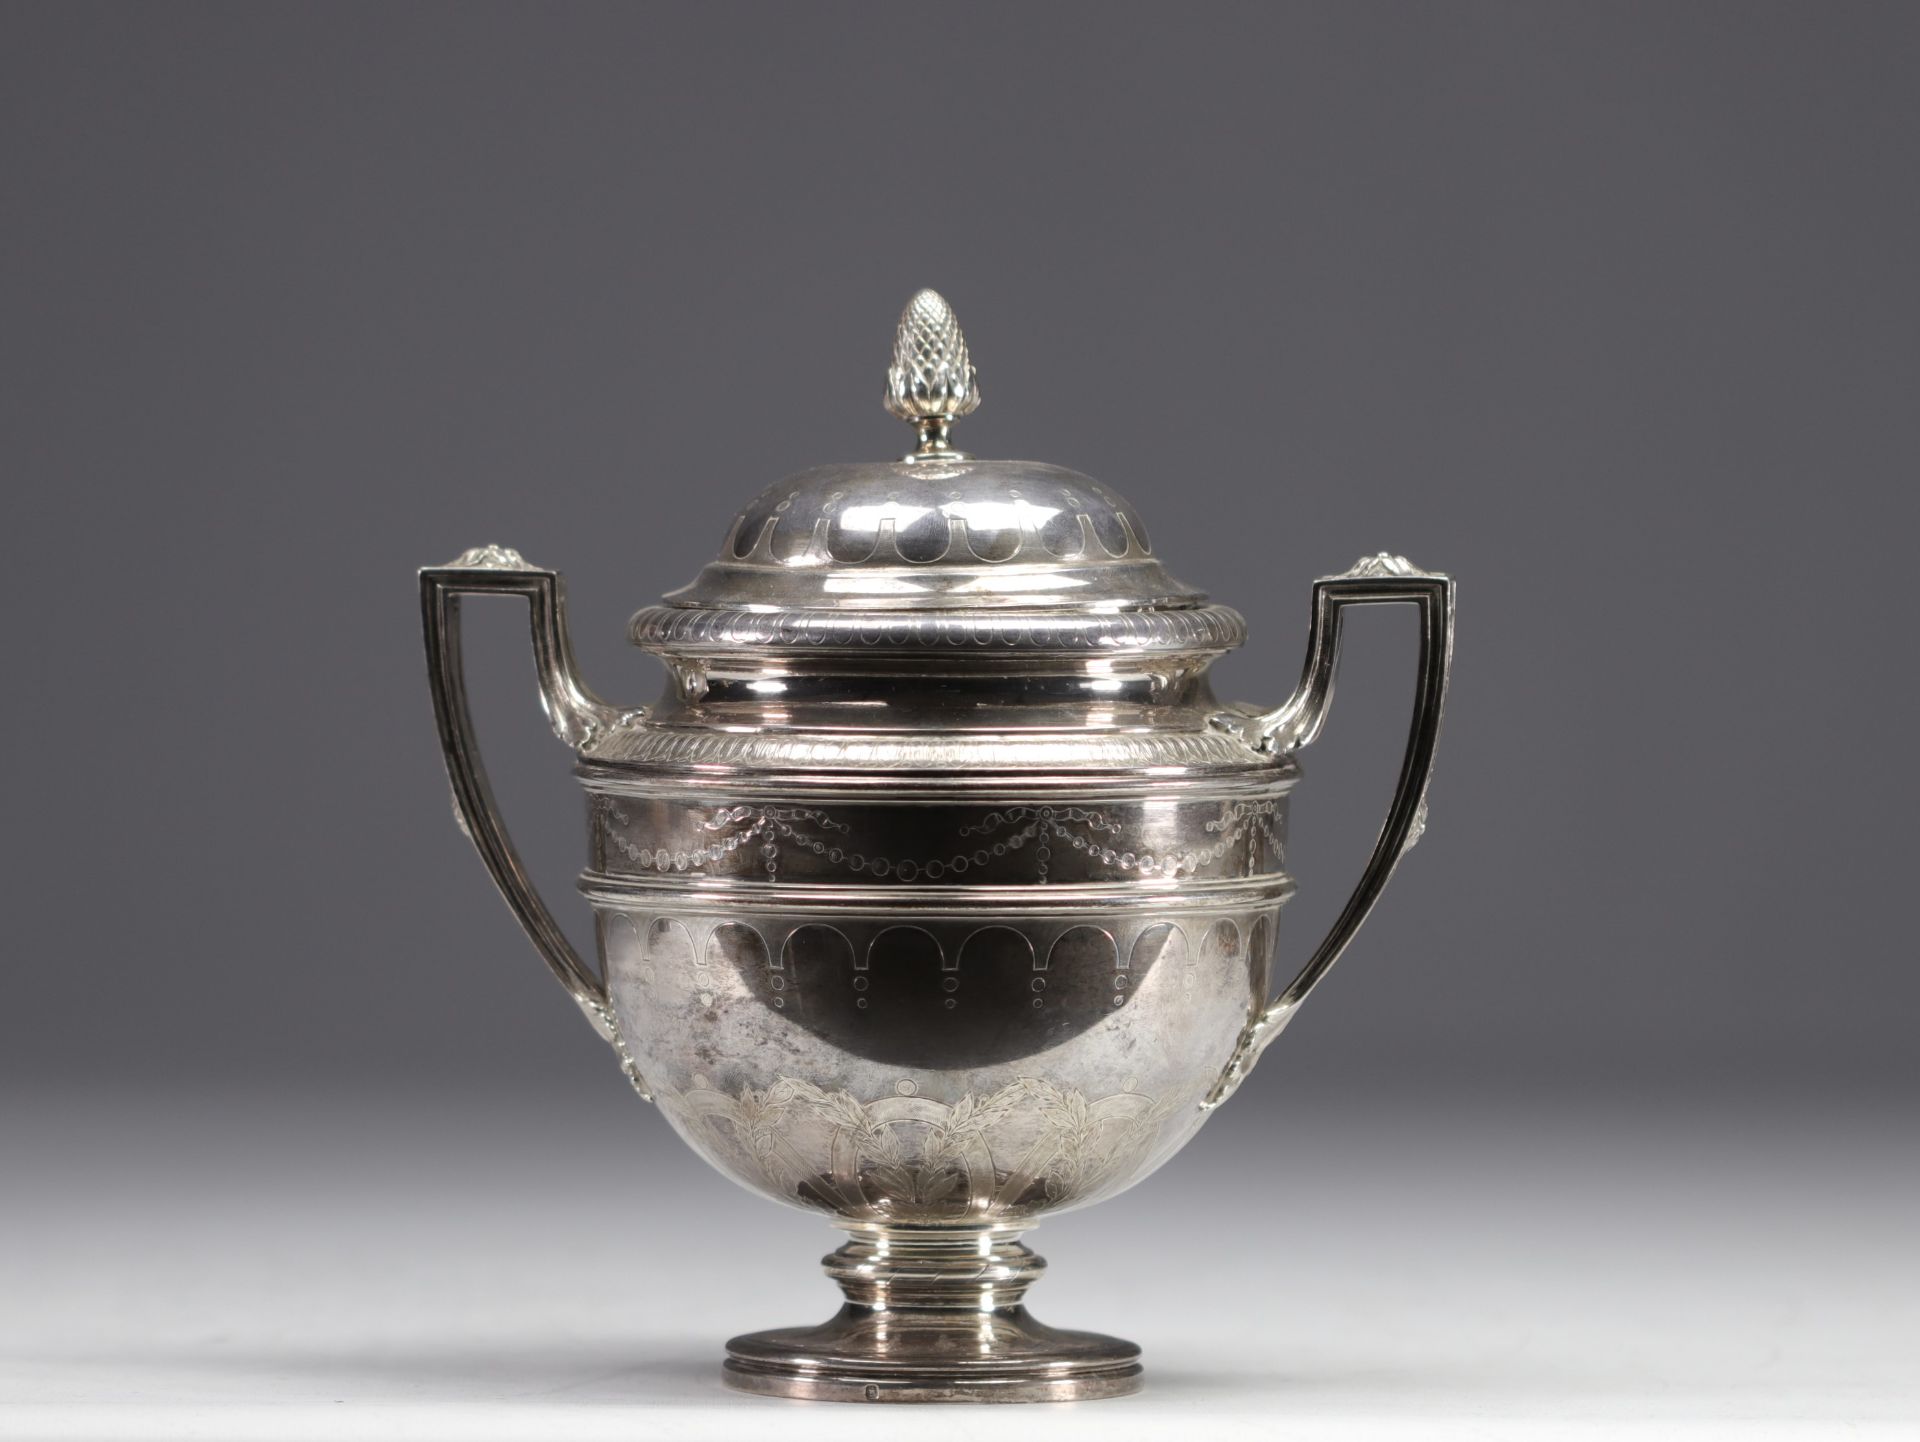 Jean-Baptiste Claude ODIOT a PARIS - Solid silver coffee service. - Image 4 of 11